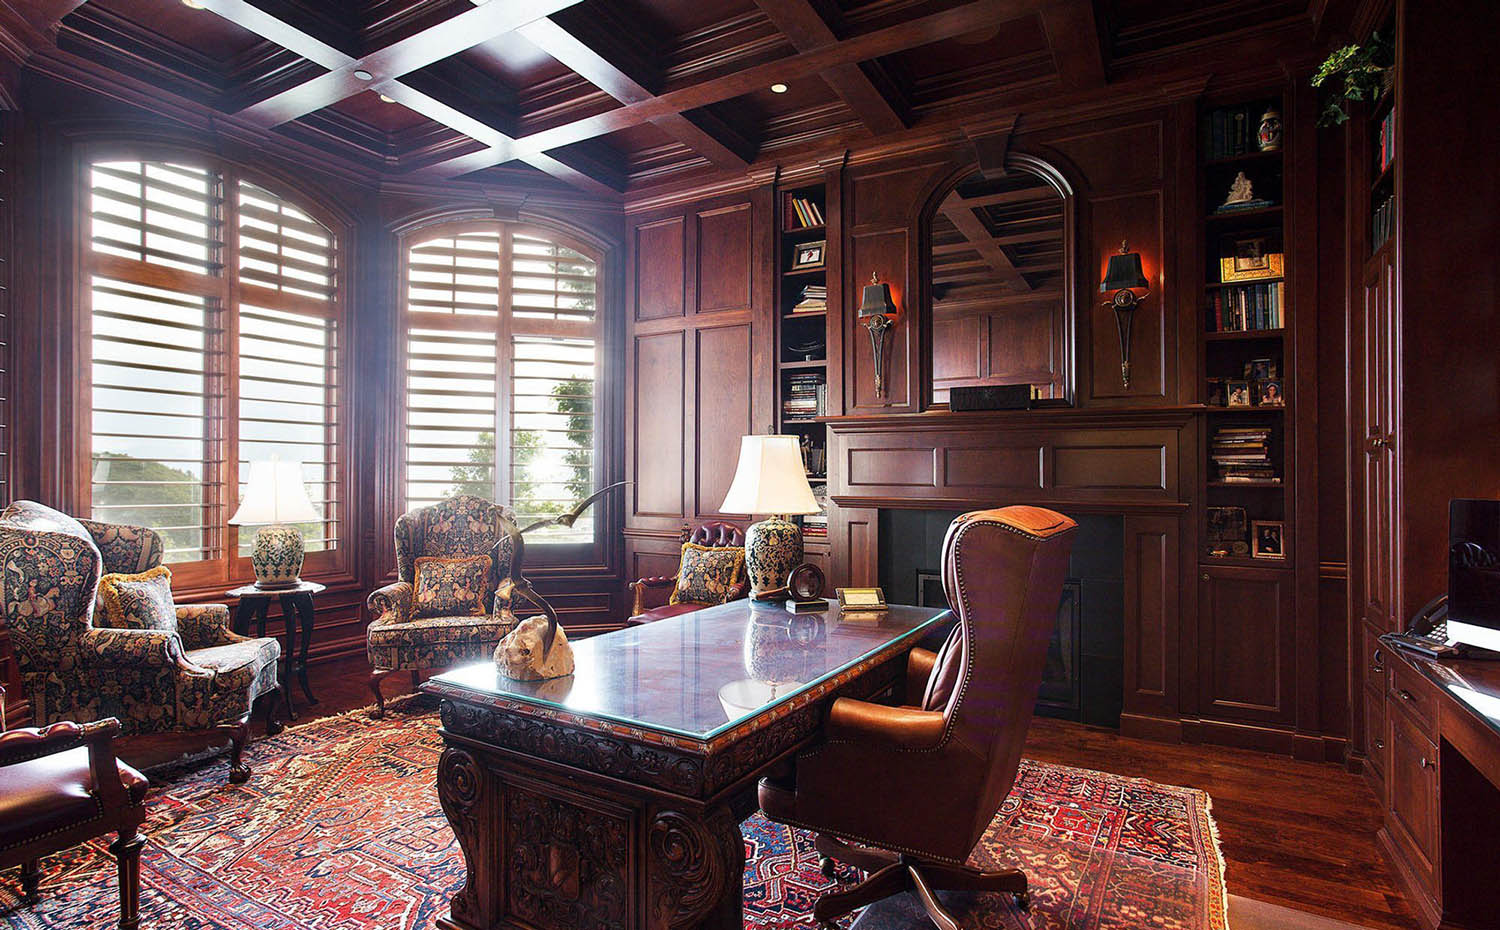 Rich all wood wall paneling stained a dark mahogany. Wood floors with an area rug.